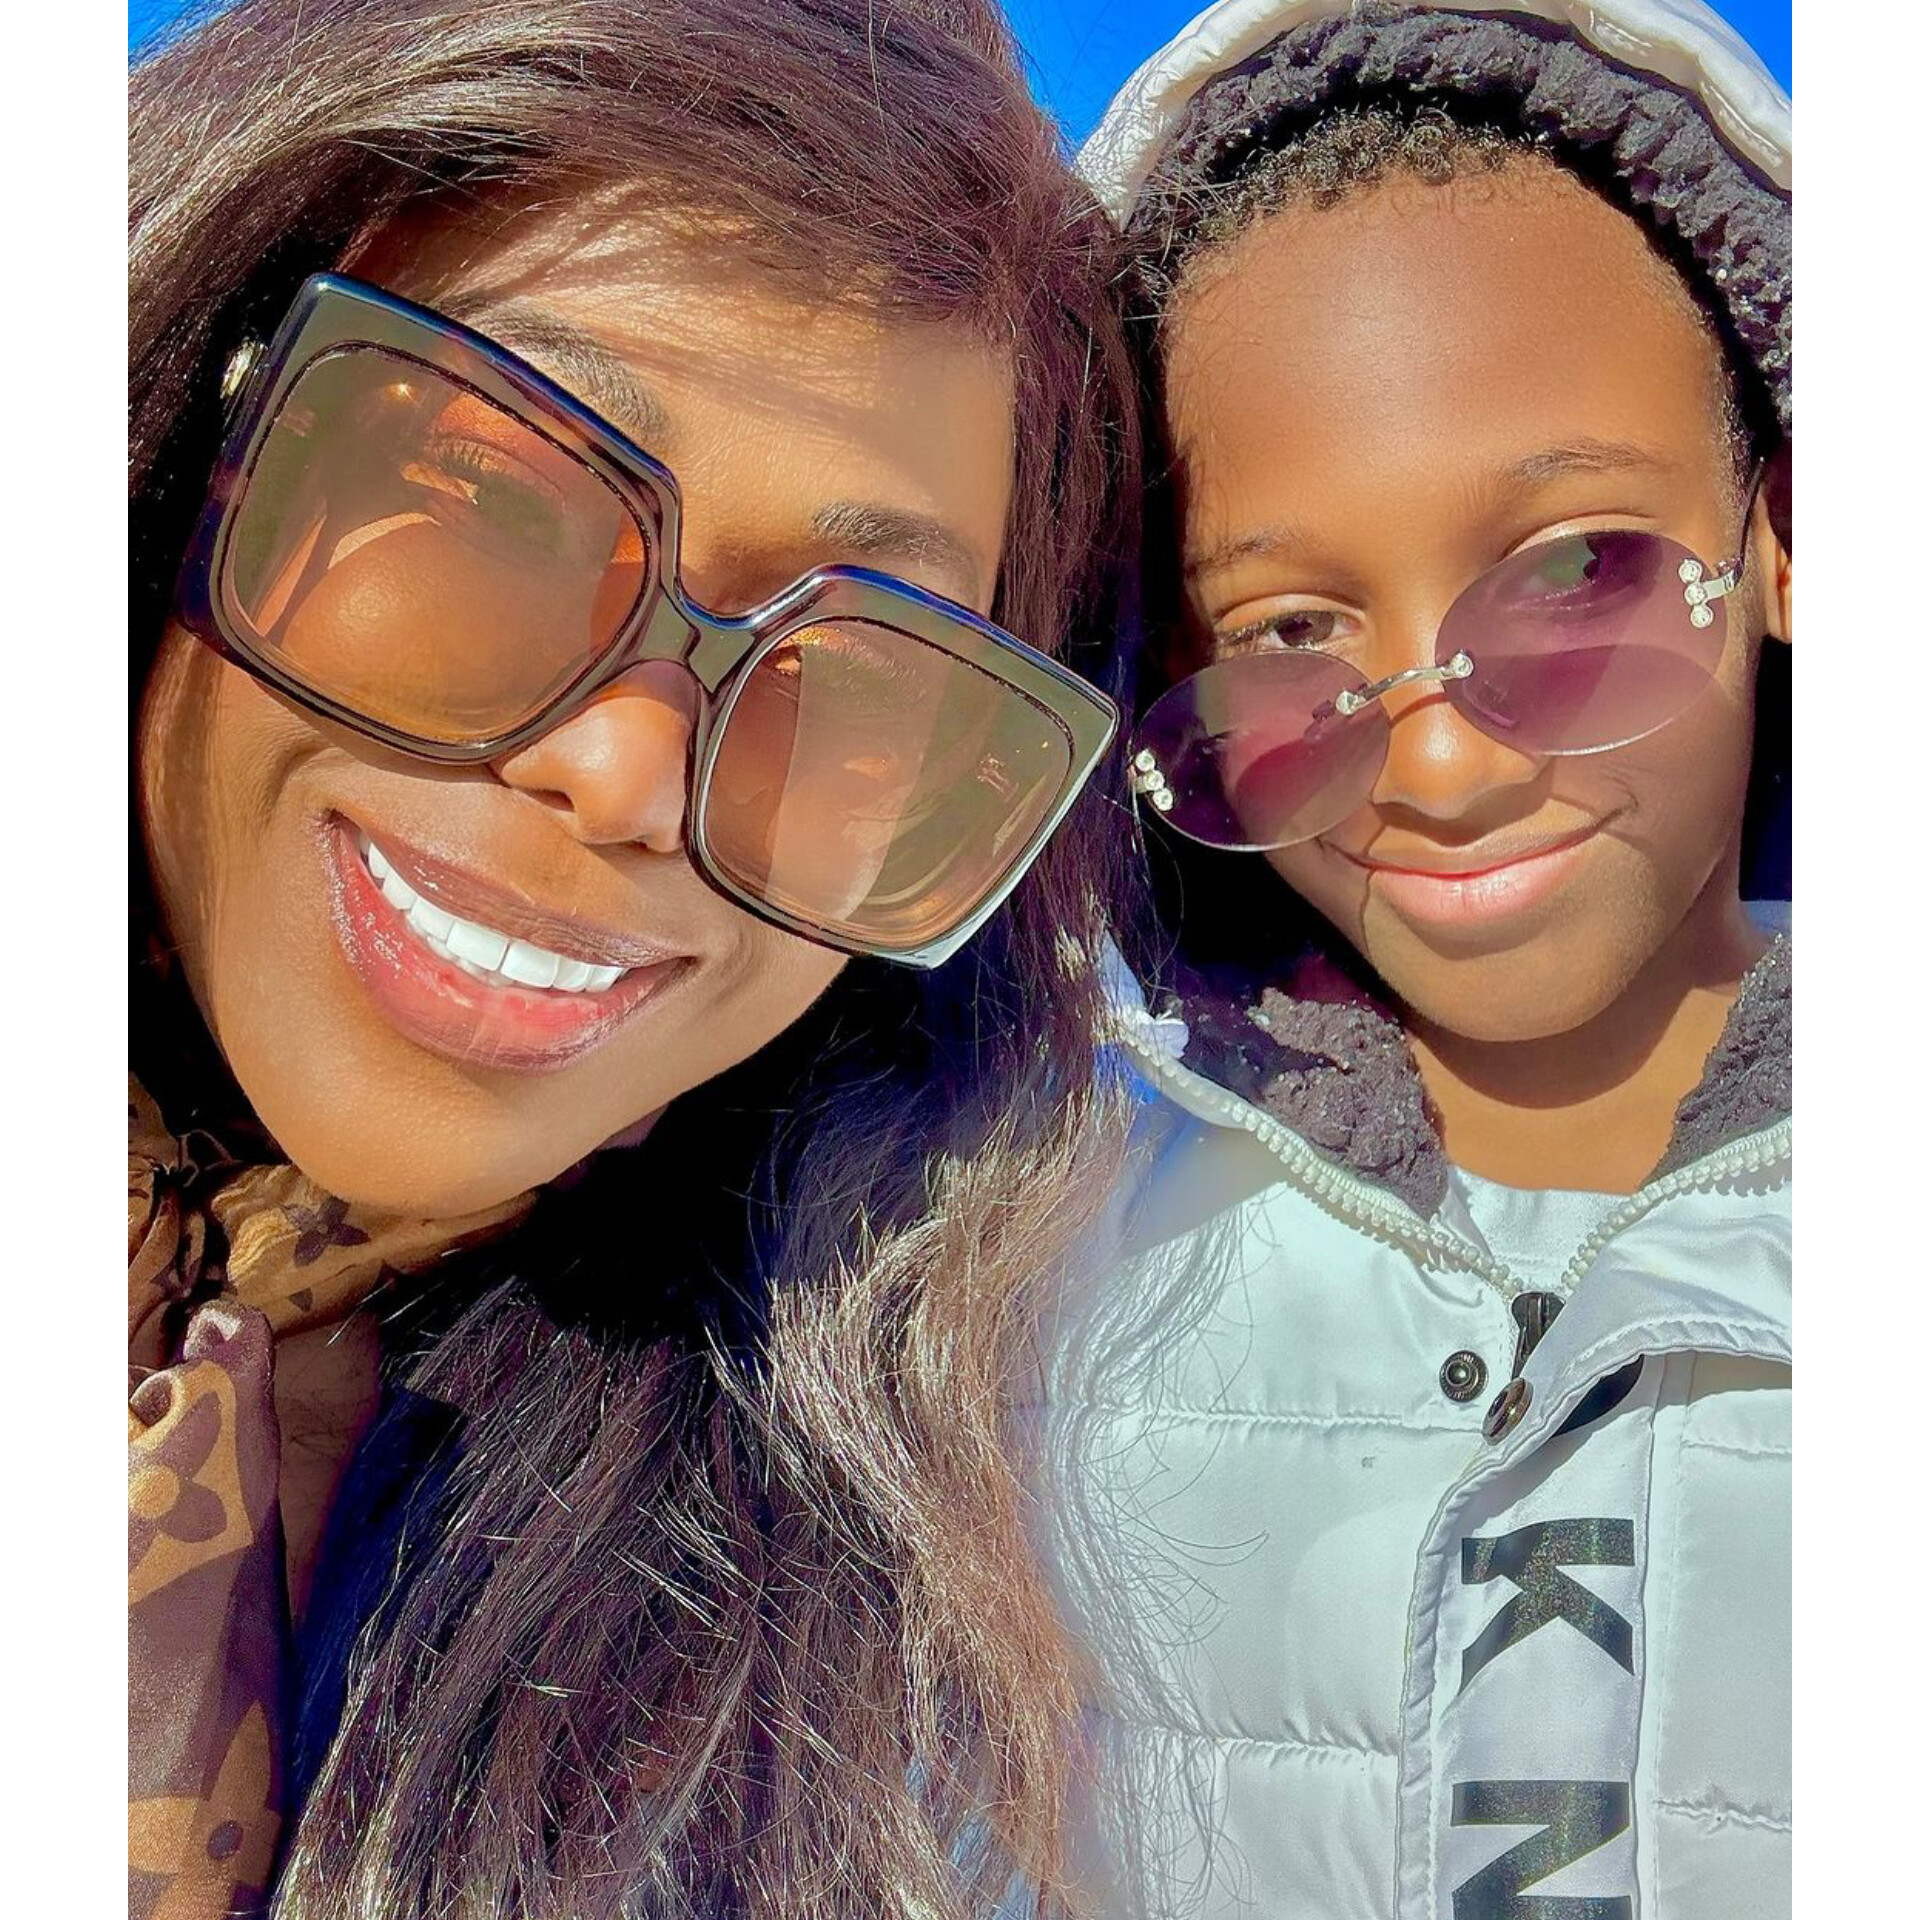 "My favorite human, and my selfie partner. Having you is one of life's greatest gifts" Uche Ogbodo celebrates Son on his 9th birthday